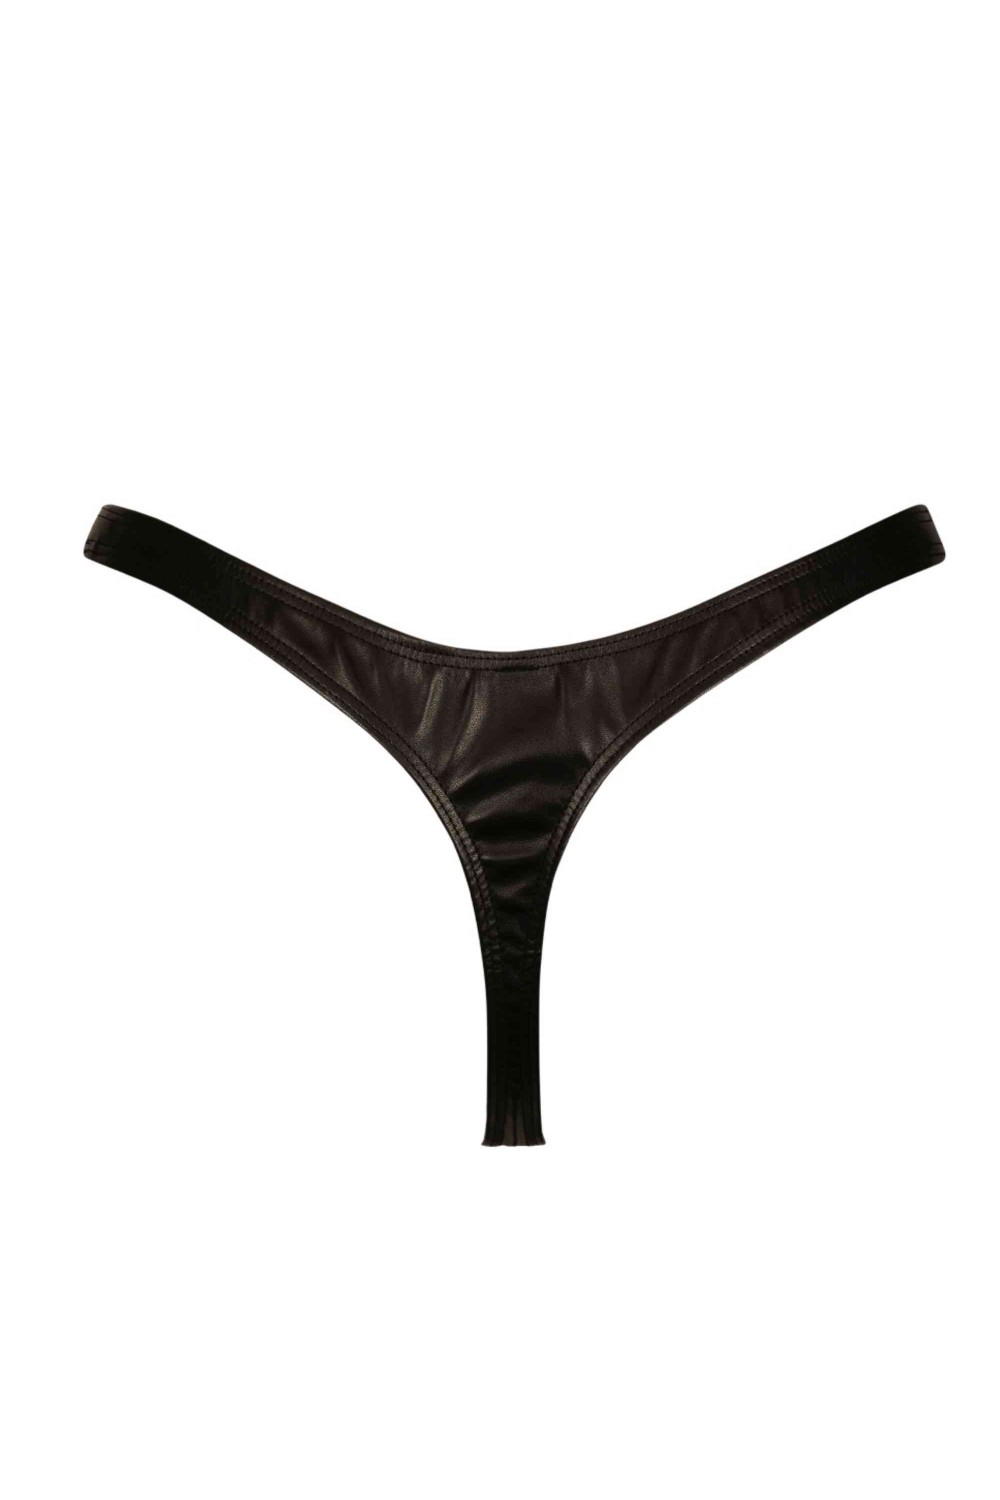 Women Sexy G-strings Faux Leather Sexy